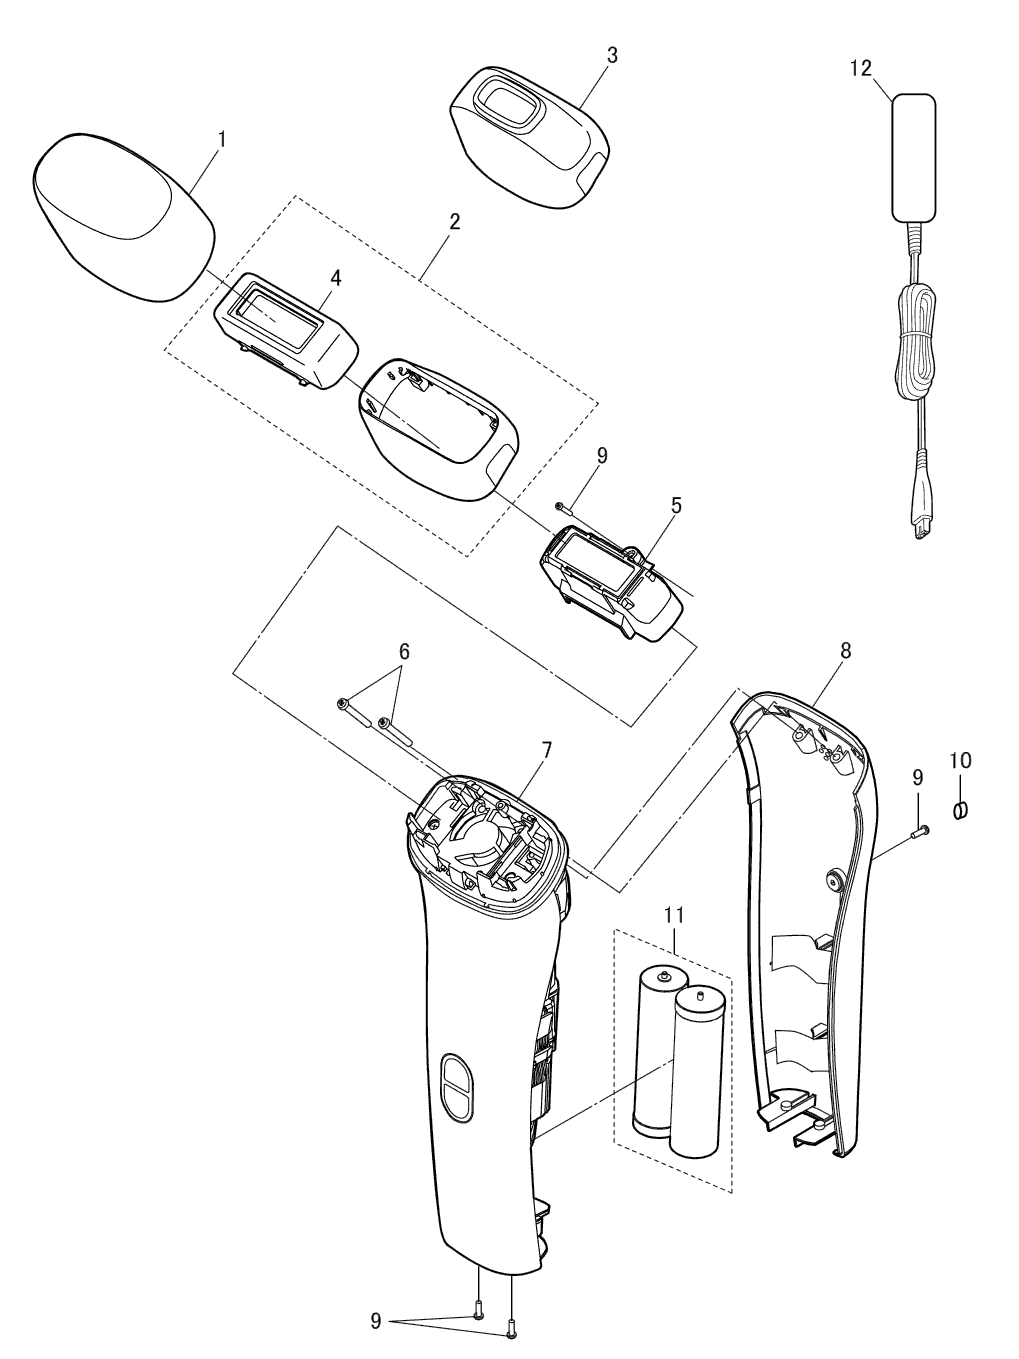 ES-WH90: Exploded View